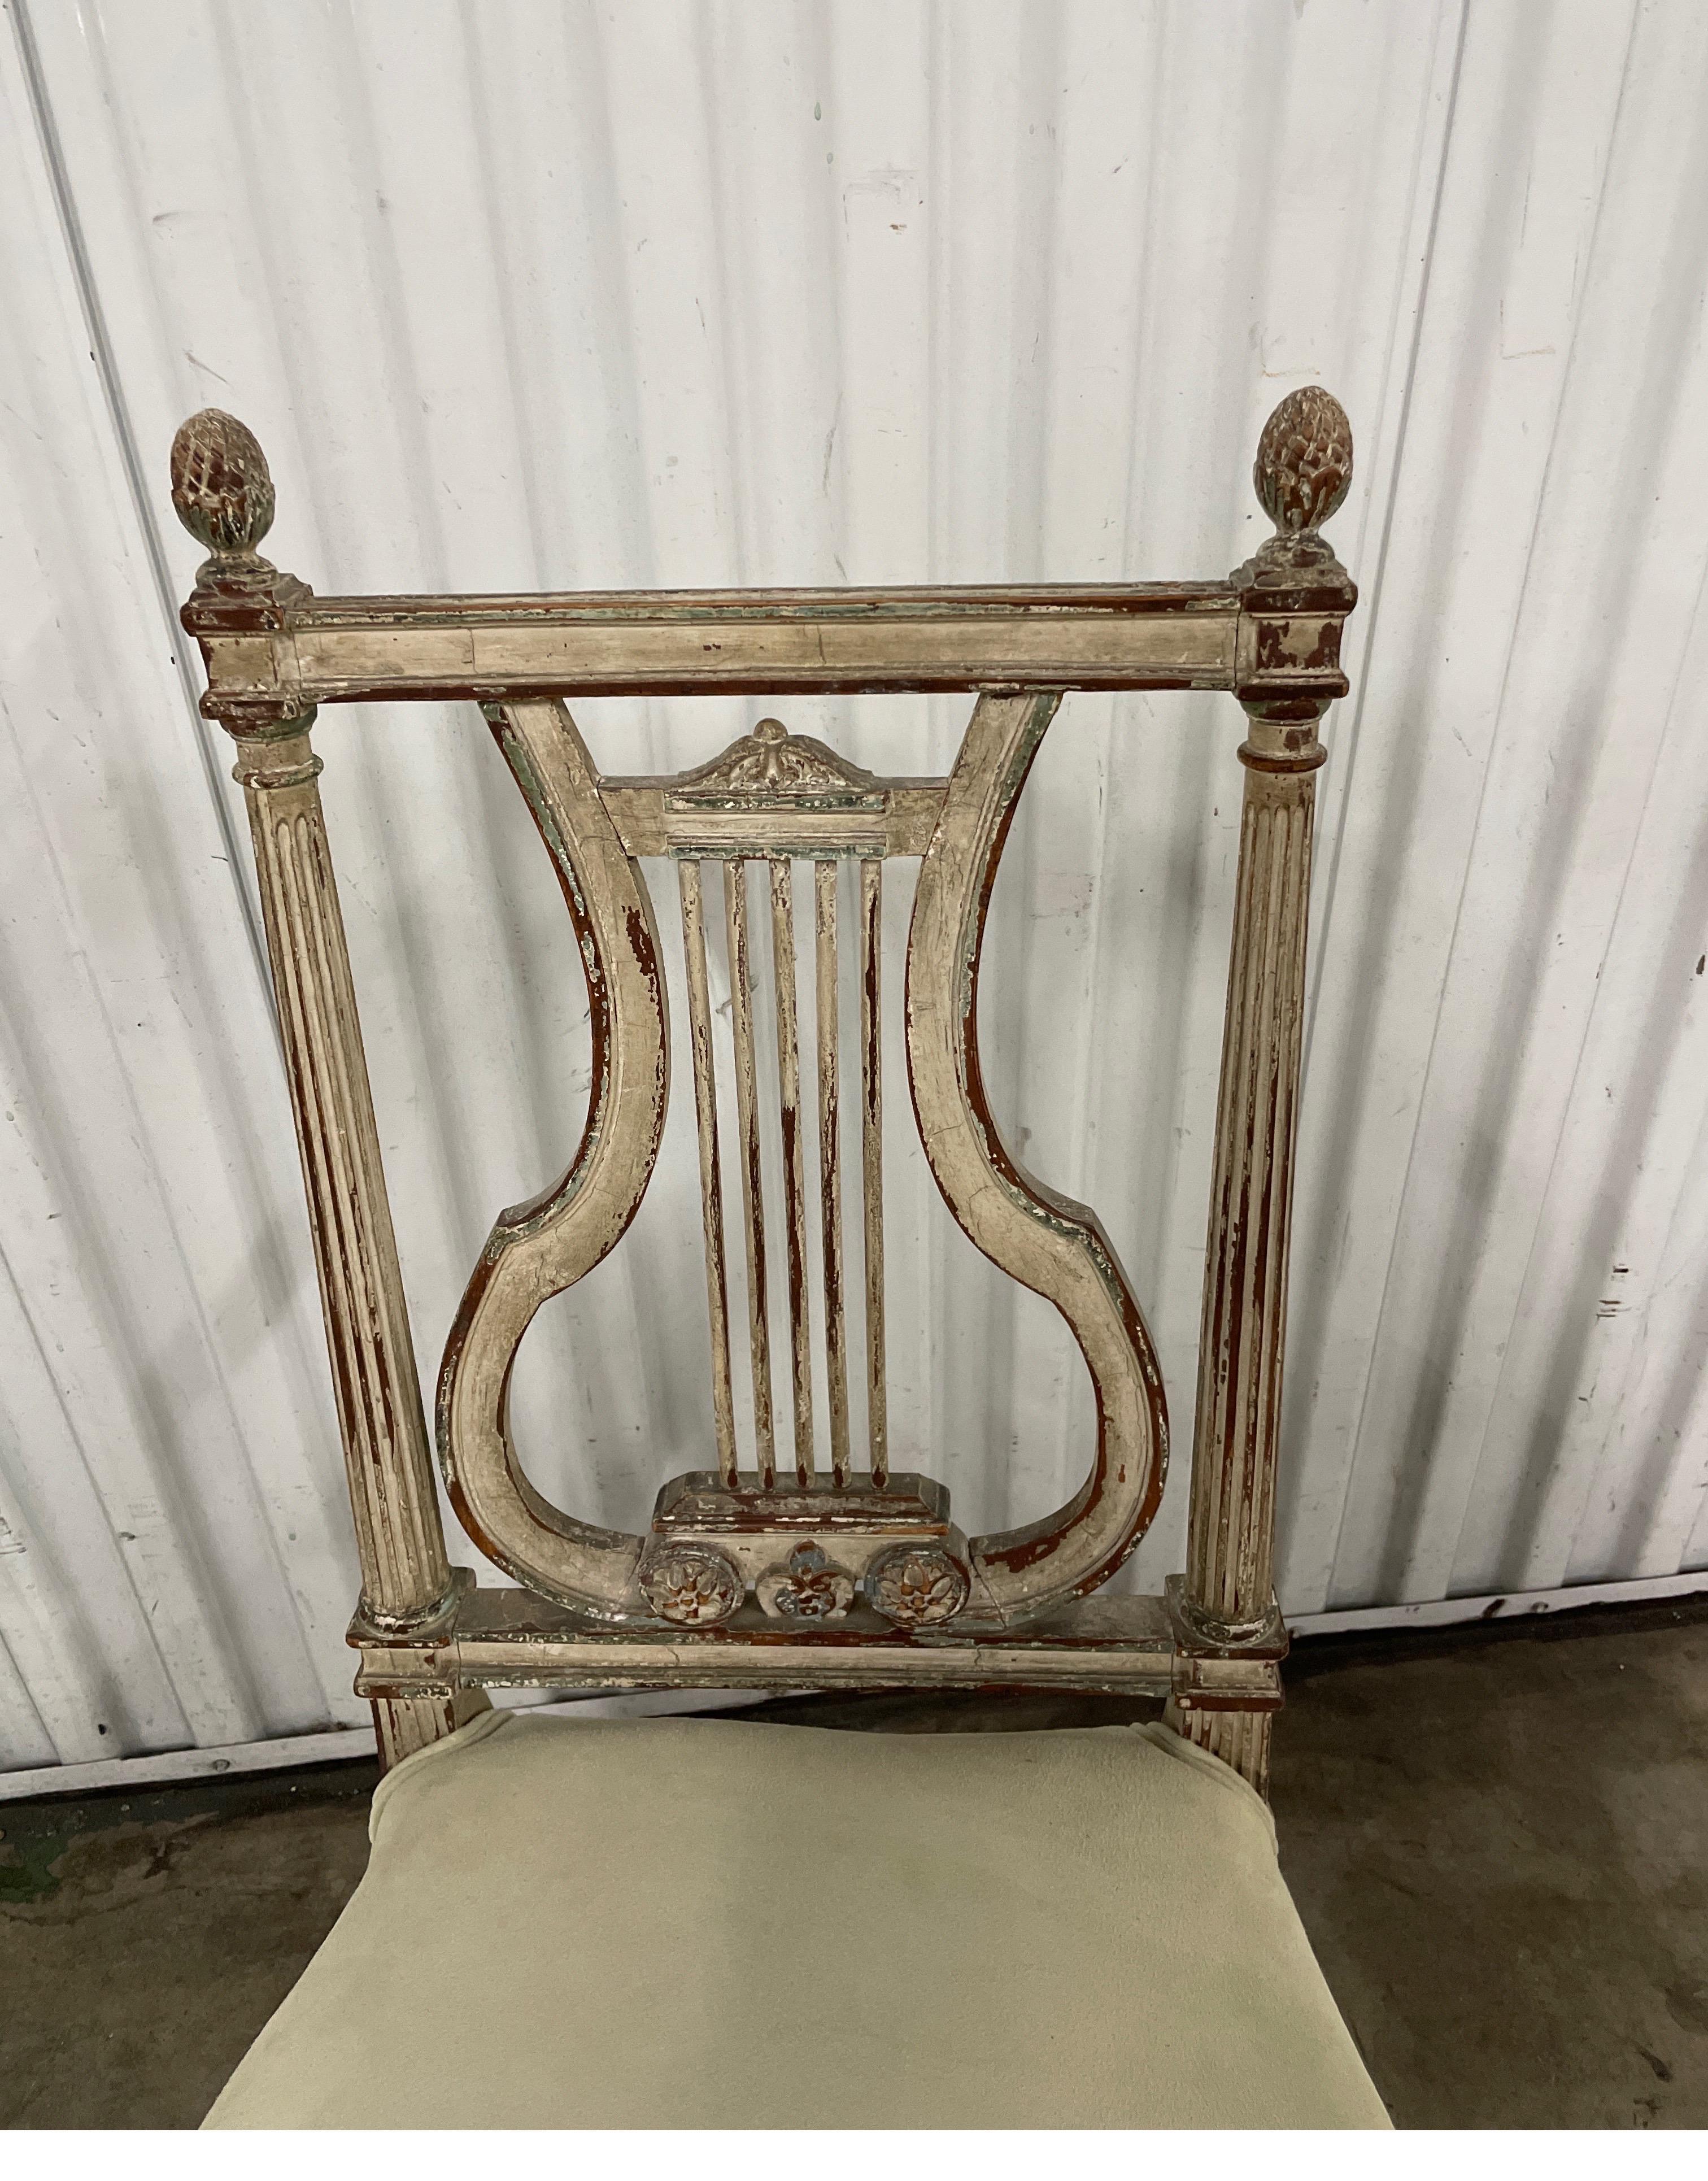 Charming antique French lyre back slipper chair.  It has a painted frame and newly upholstered suede seat. Very good condition with original painted frame.